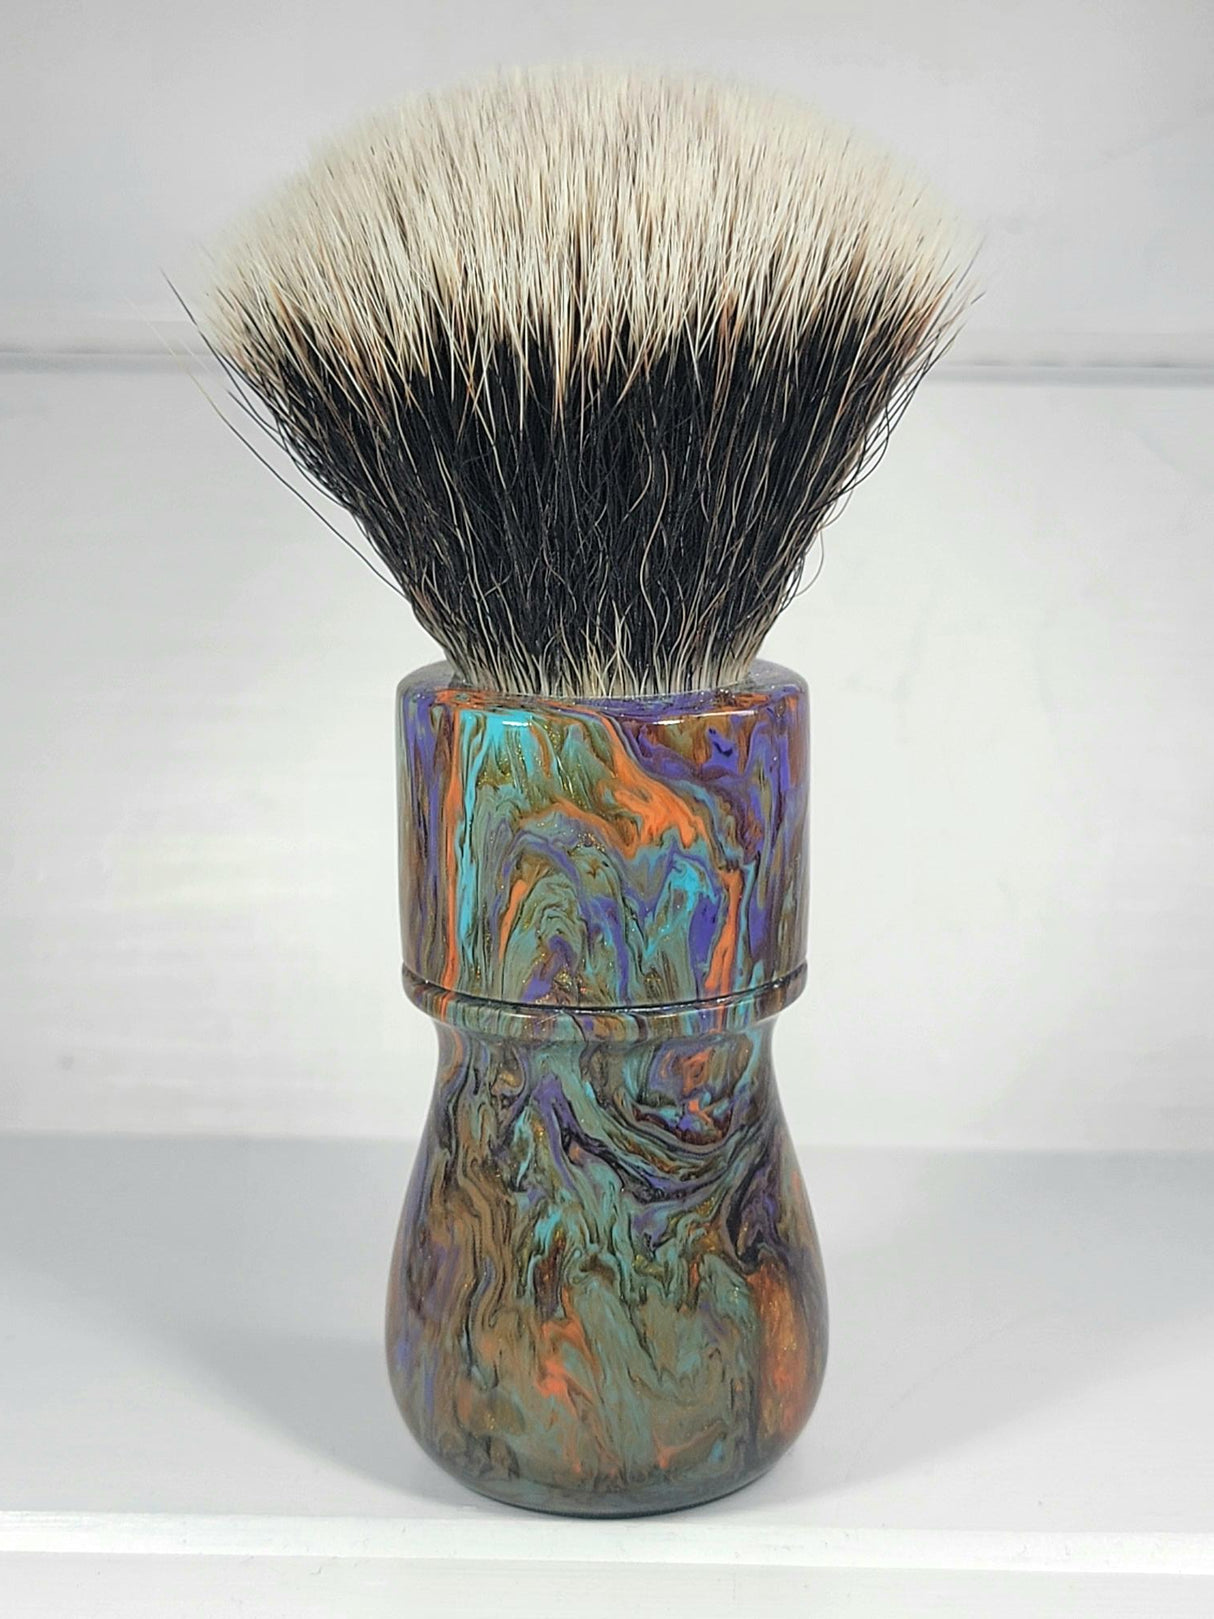 Maritime Brush Co. - Half Moon - 24mm Spalted Maple Burl and Resin - Premium M5C Fan Synthetic (SHD) Knot